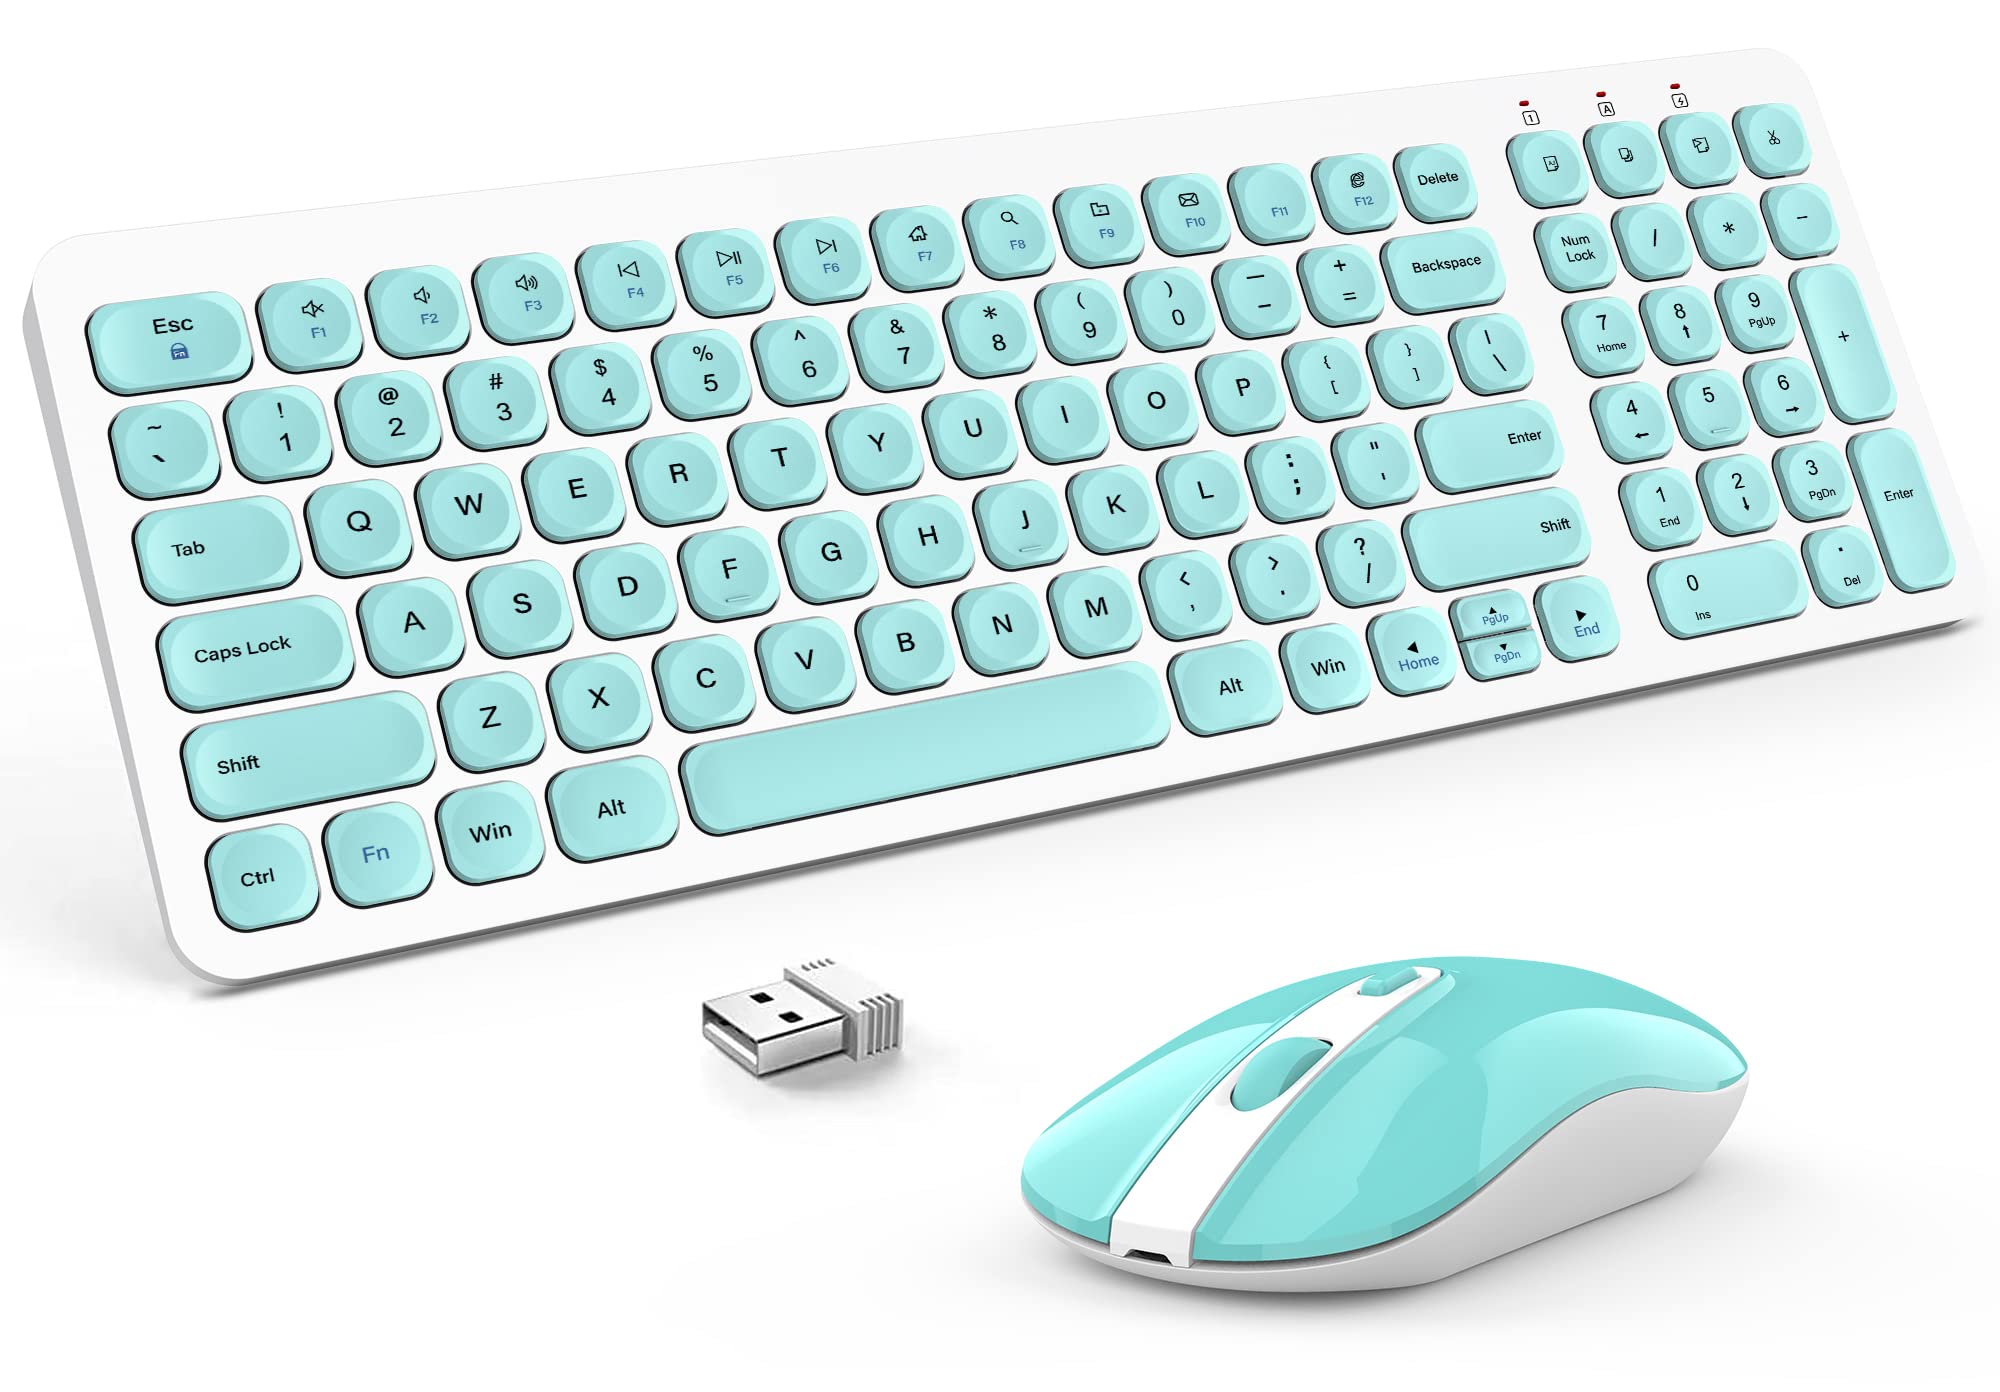 SOOOO Wireless Keyboard and Mouse Combo, Ultra Thin Quiet Portable Wireless Keyboard and 2.4GHz Wireless Mouse with Nano USB Receiver for Windows Laptop PC Notebook (White(Blue Keys))